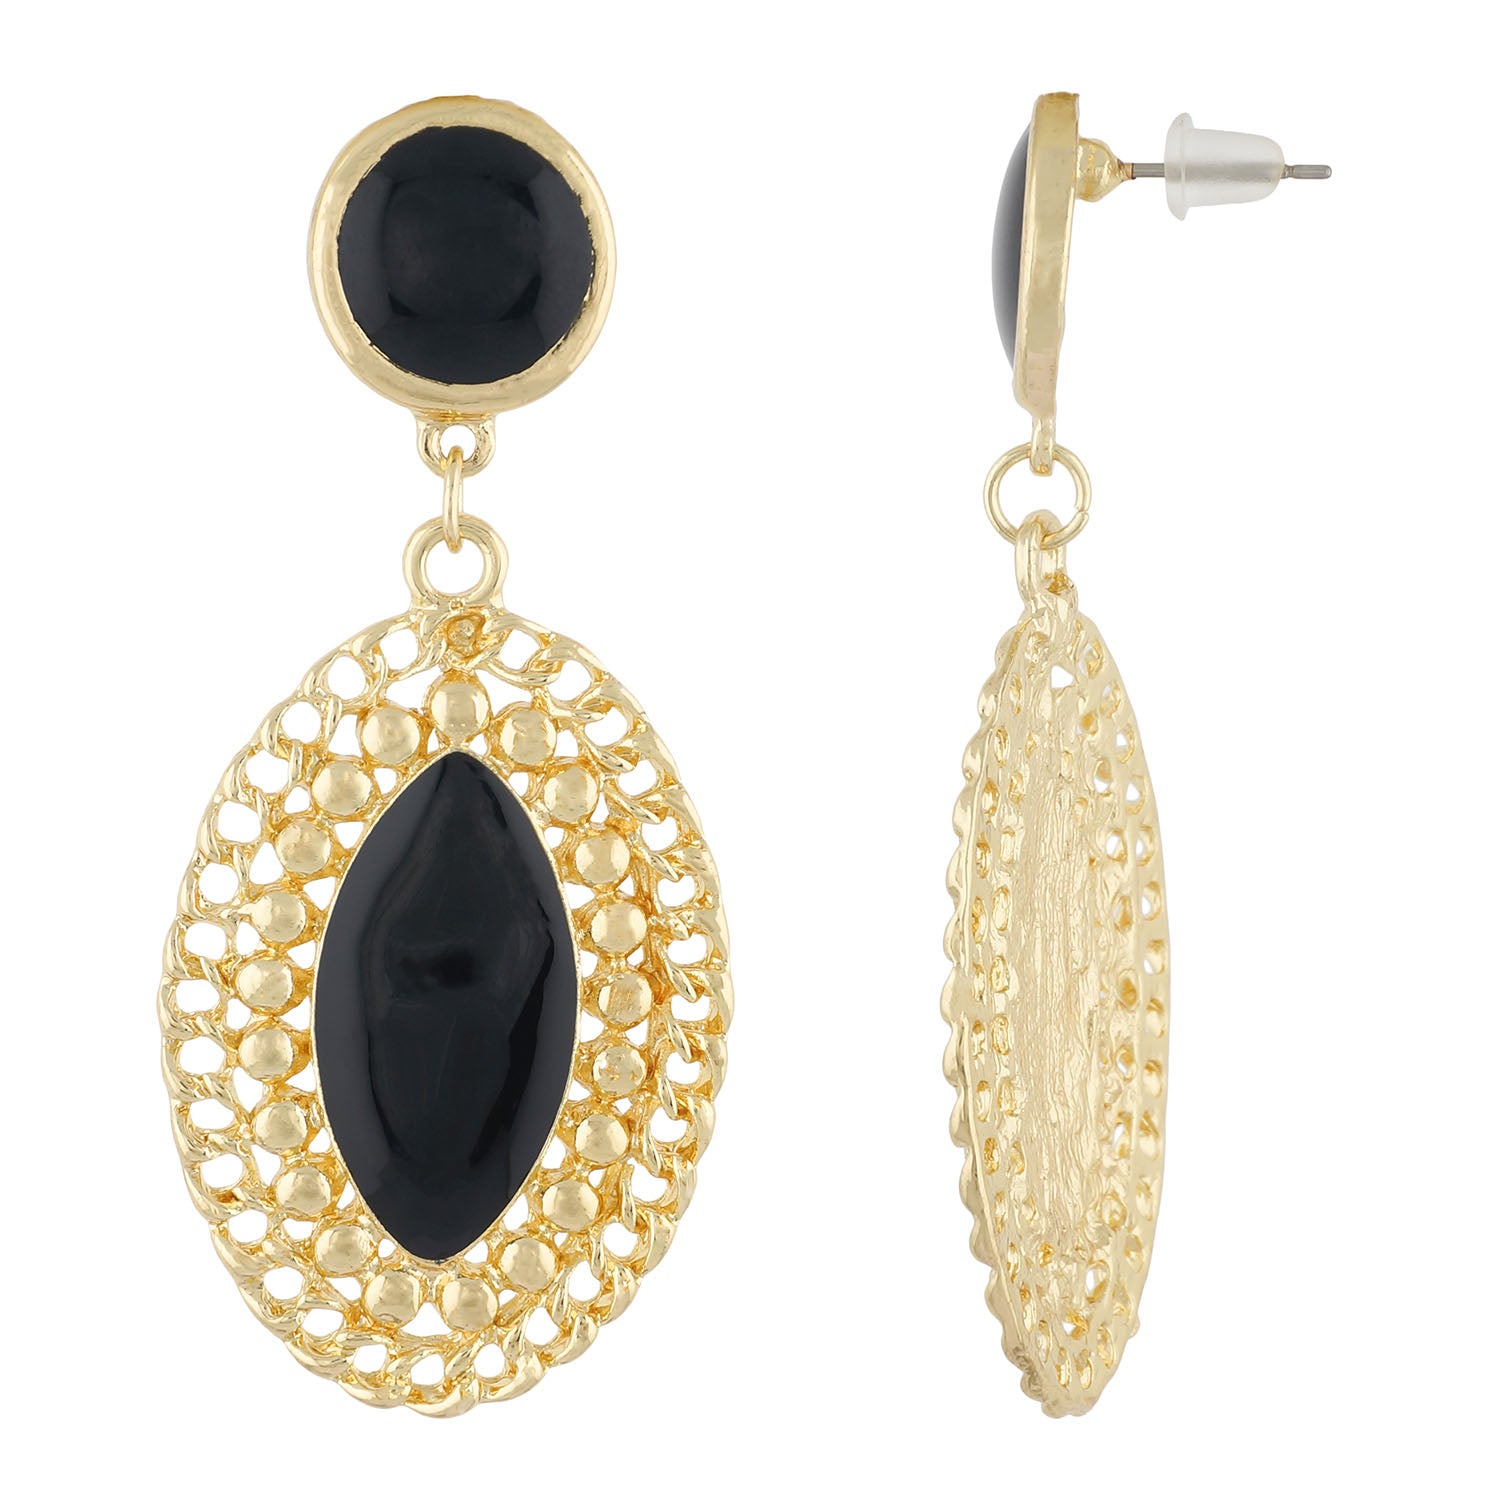 Stylish Black and Gold Colour Oval Shape Enamel Enhanced Earring for Girls and Women